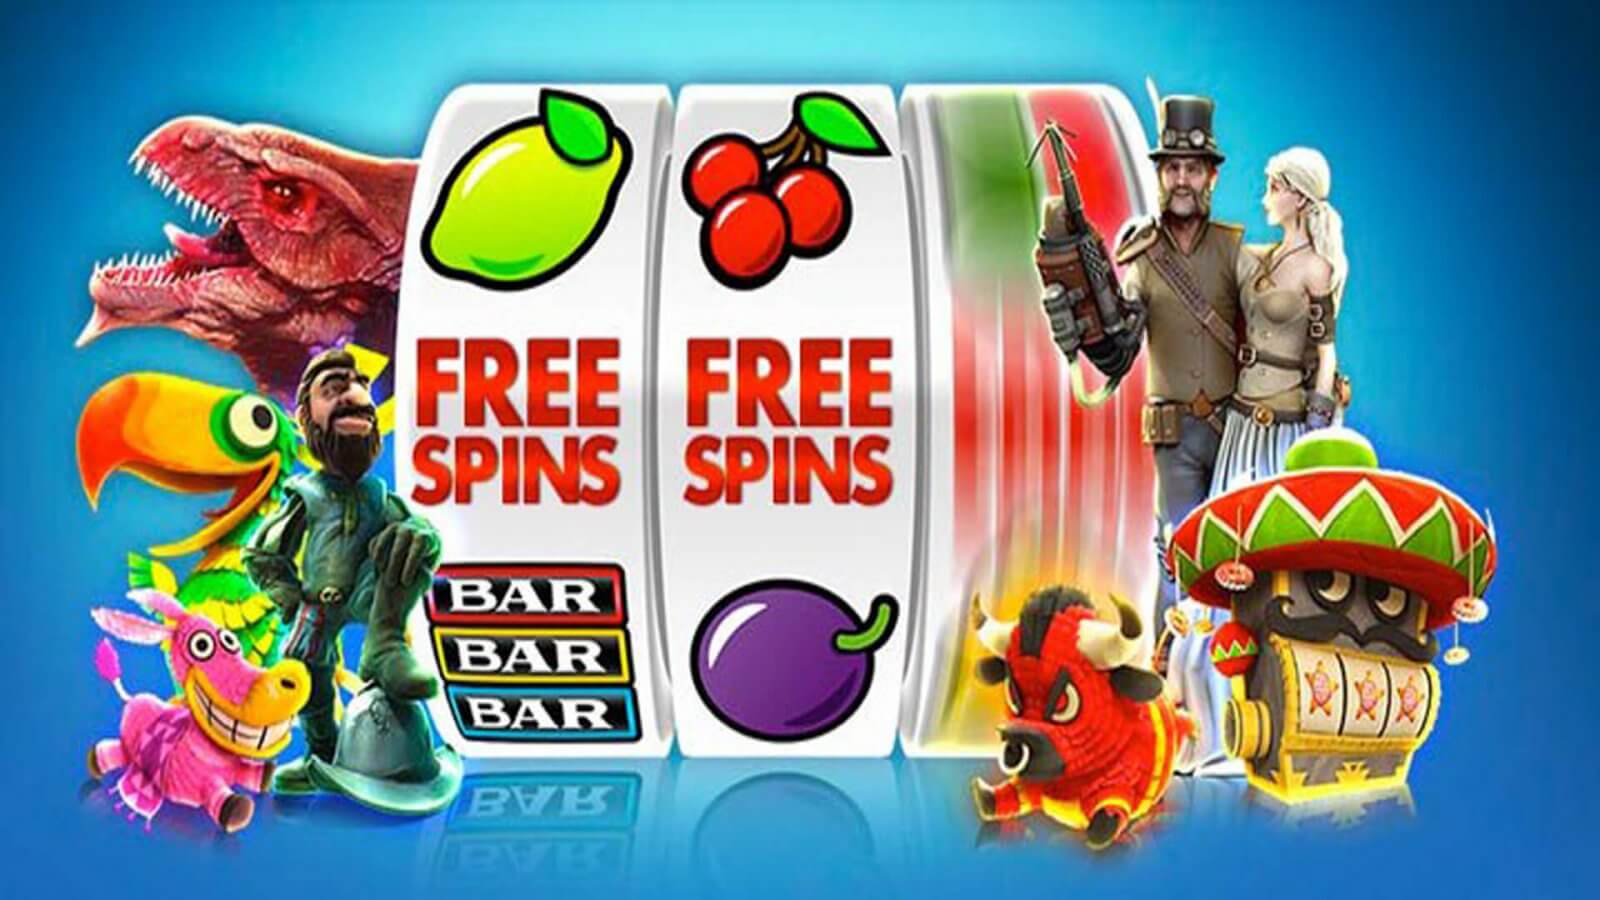 How to get free spins at casinos in India